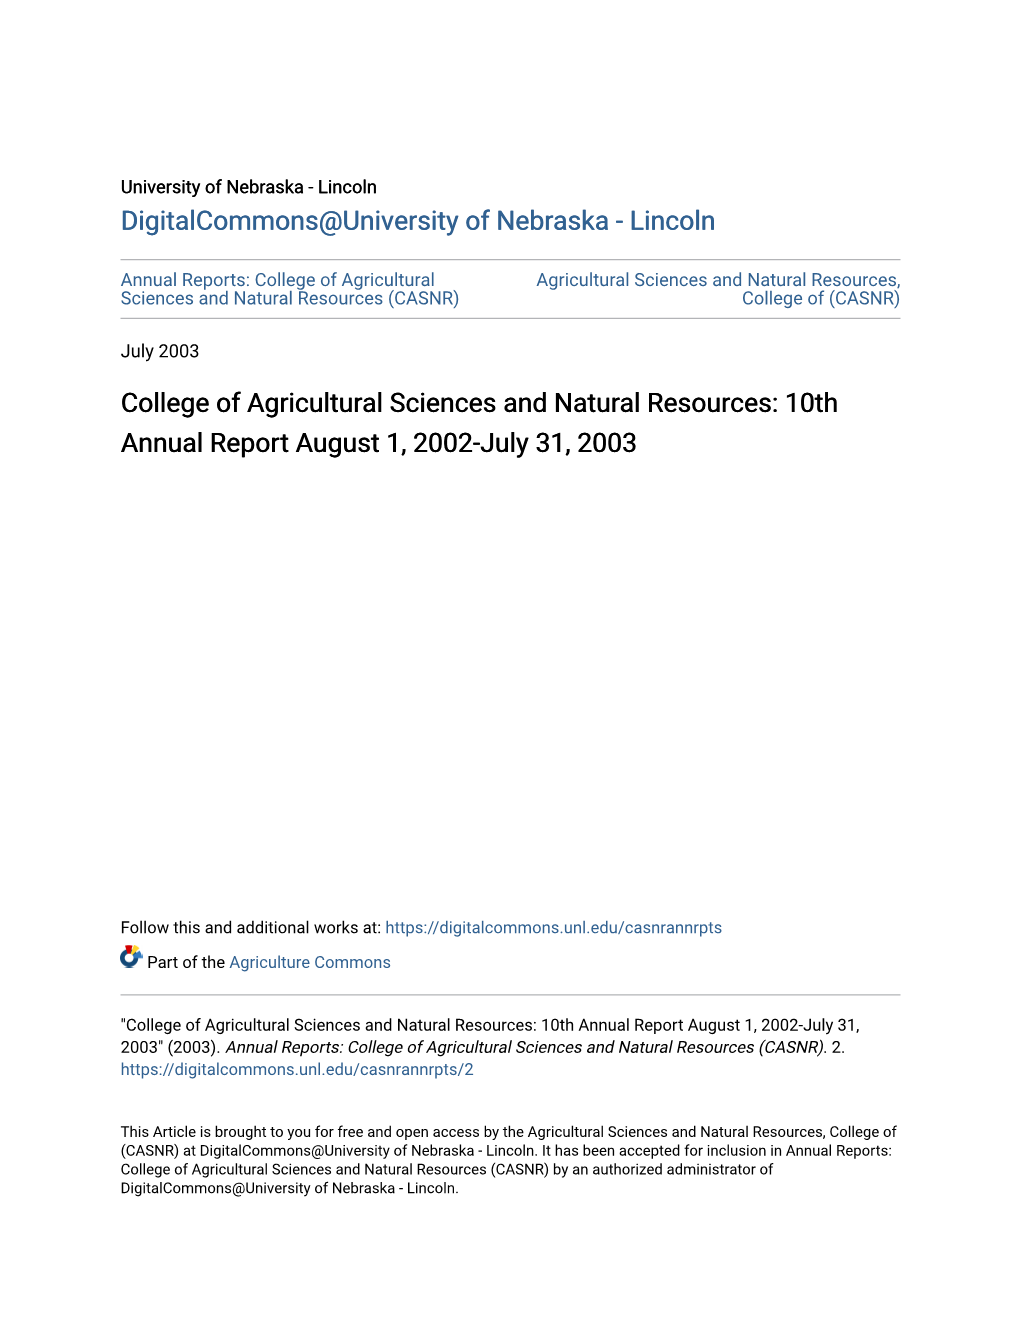 College of Agricultural Sciences and Natural Resources: 10Th Annual Report August 1, 2002-July 31, 2003